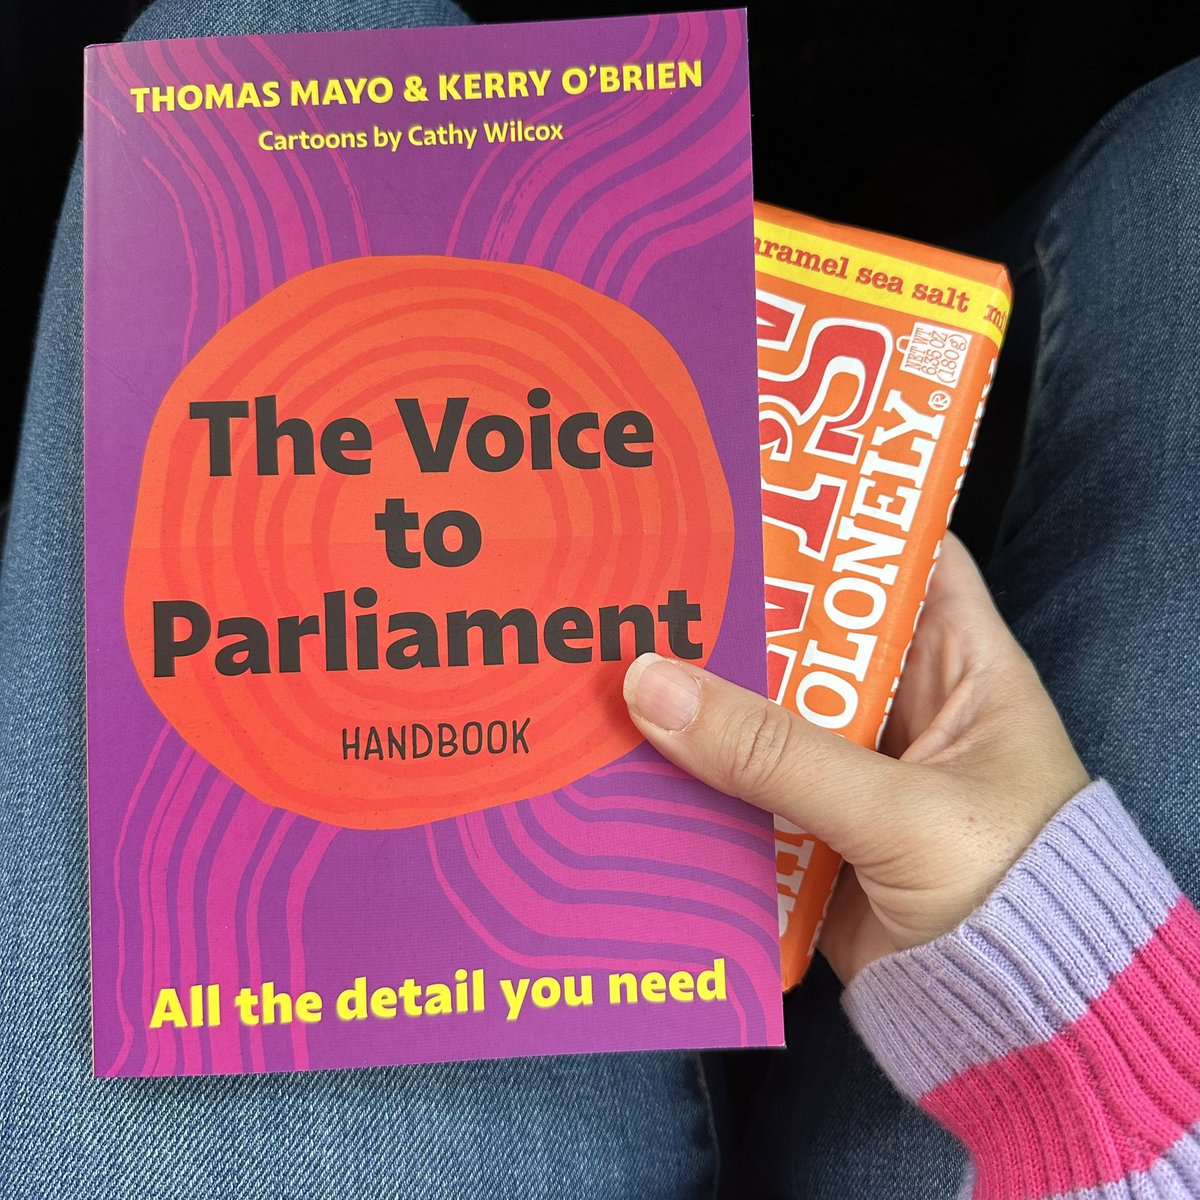 Okay, I’m back at the hairdresser today and I’m gonna give him my copy of @thomasmayo23’s #VoiceToParliament handbook and a block of Tony’s Chocolonely to sweeten the deal. I’ll let you know how this goes 🤞🏻